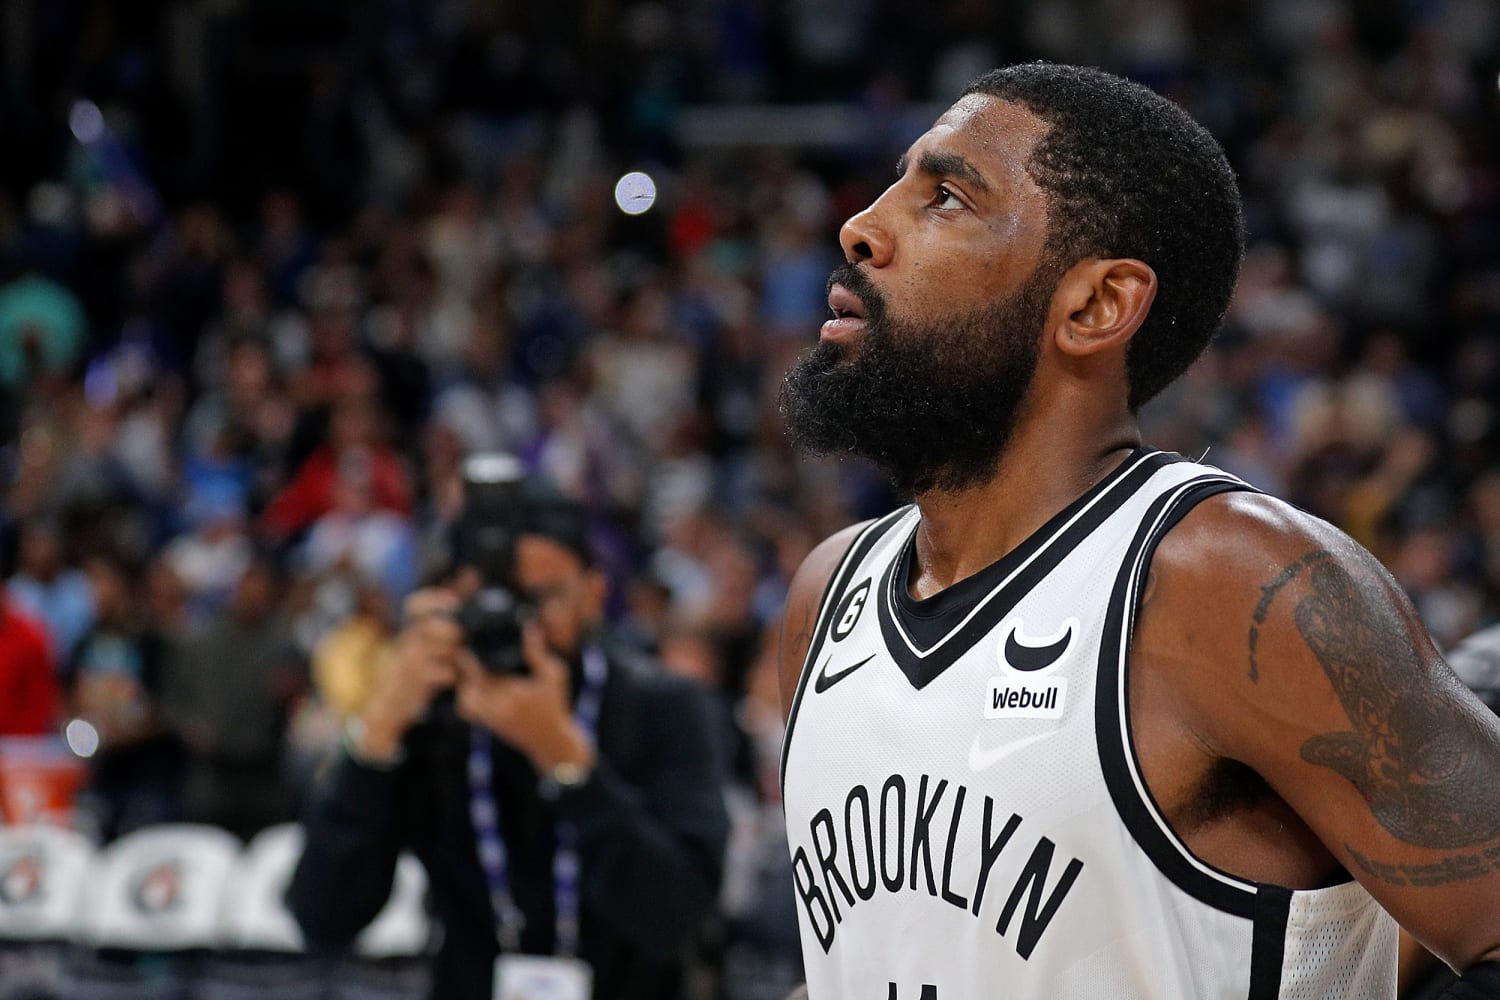 Nets owner says he is 'disappointed' after Kyrie Irving appeared to promote antisemitic film